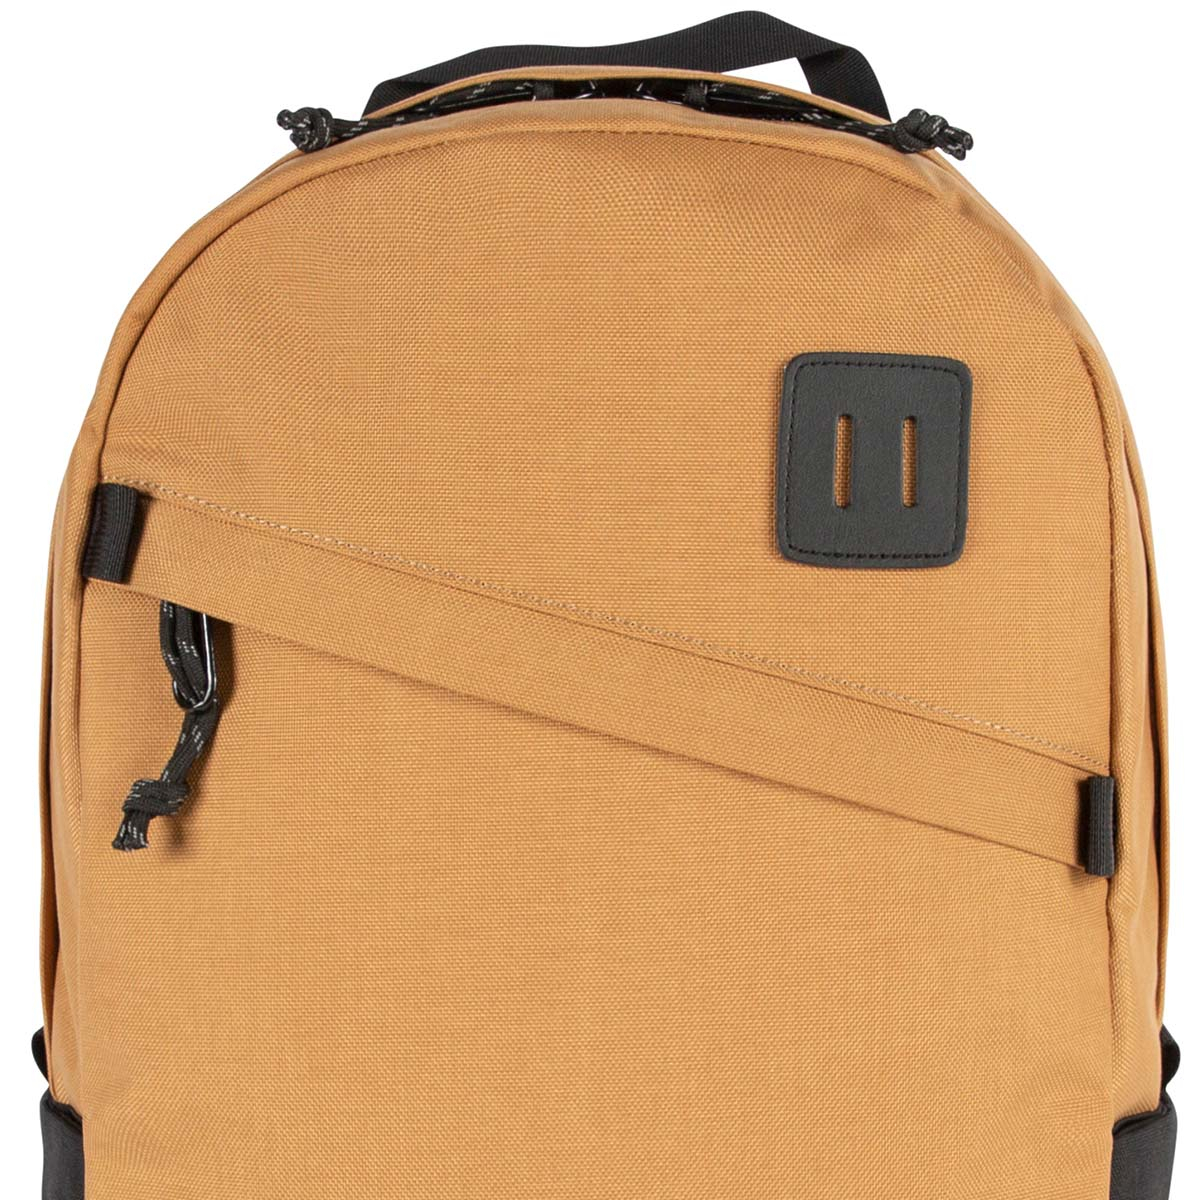 Topo Designs Daypack Classic Khaki/Black, it’s great as an everyday work bag, yet it has enough room for extra layers on the trail